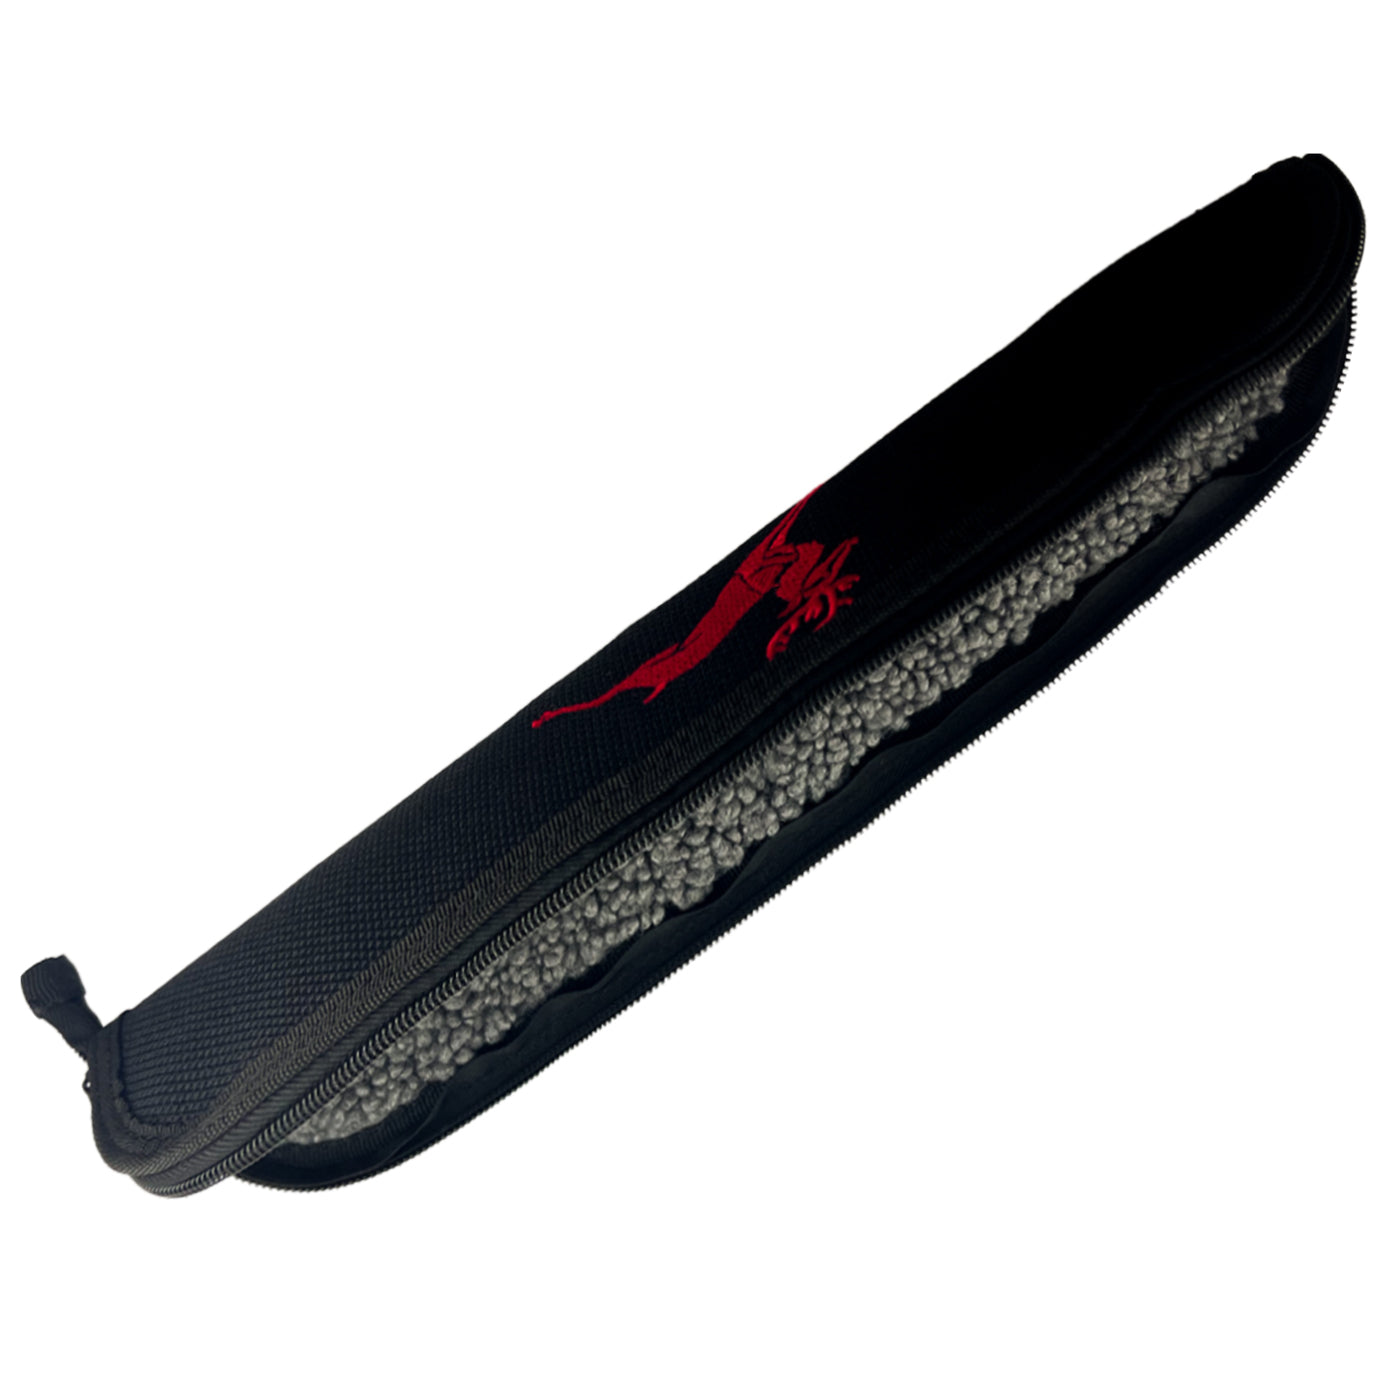 Knife Cases with Polar Interior - Deer Running Embroidered